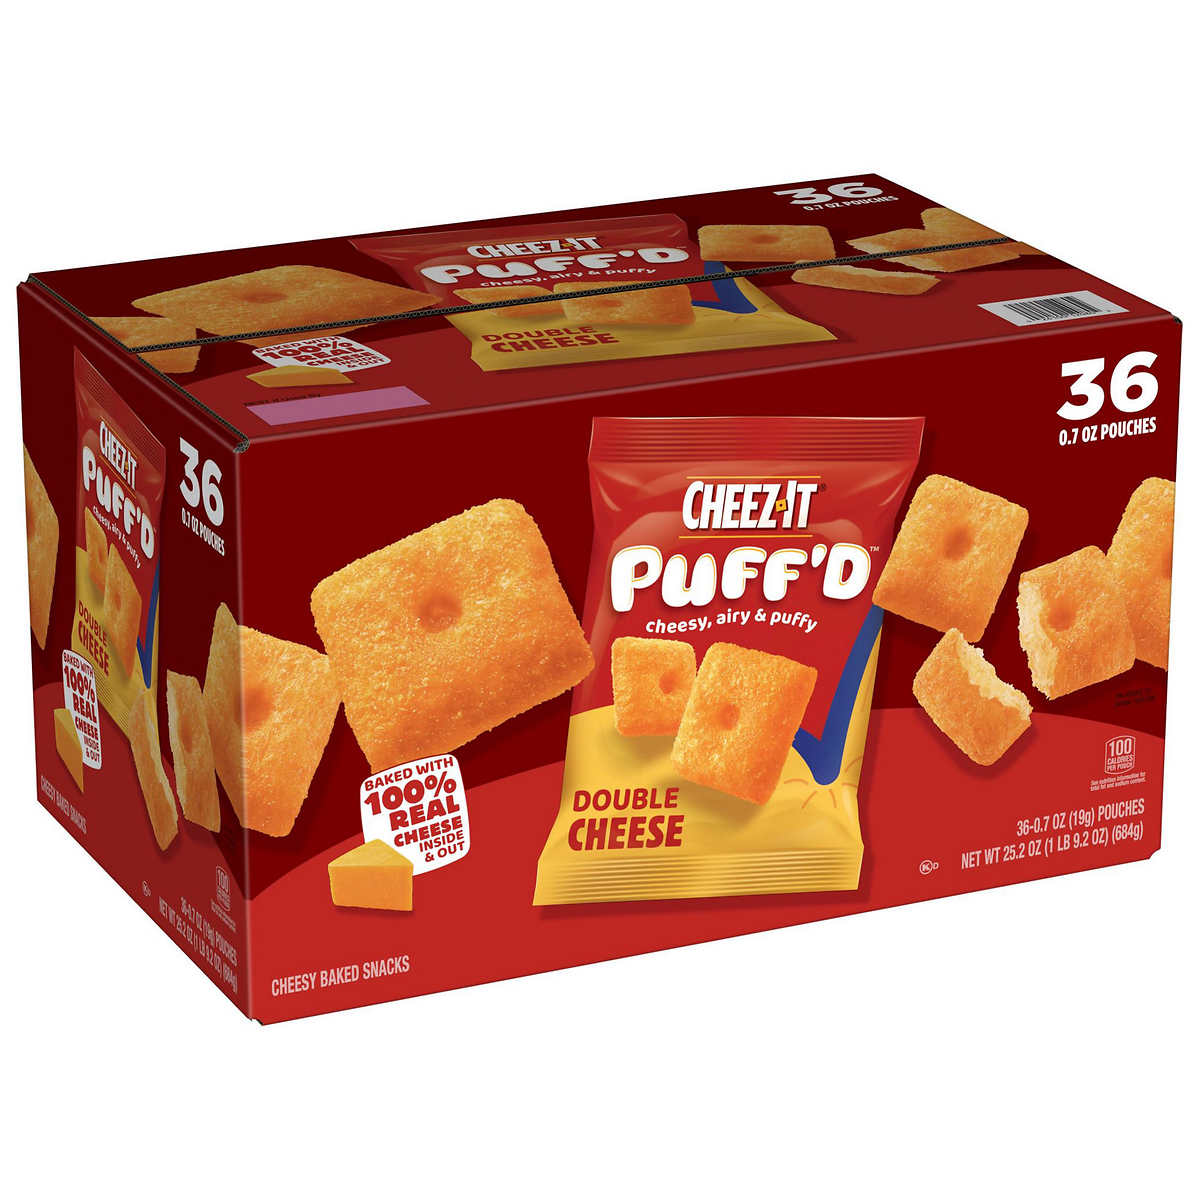 Cheez-It Puff'd Baked Snacks, Double Cheese, 0.7 oz, 36 count